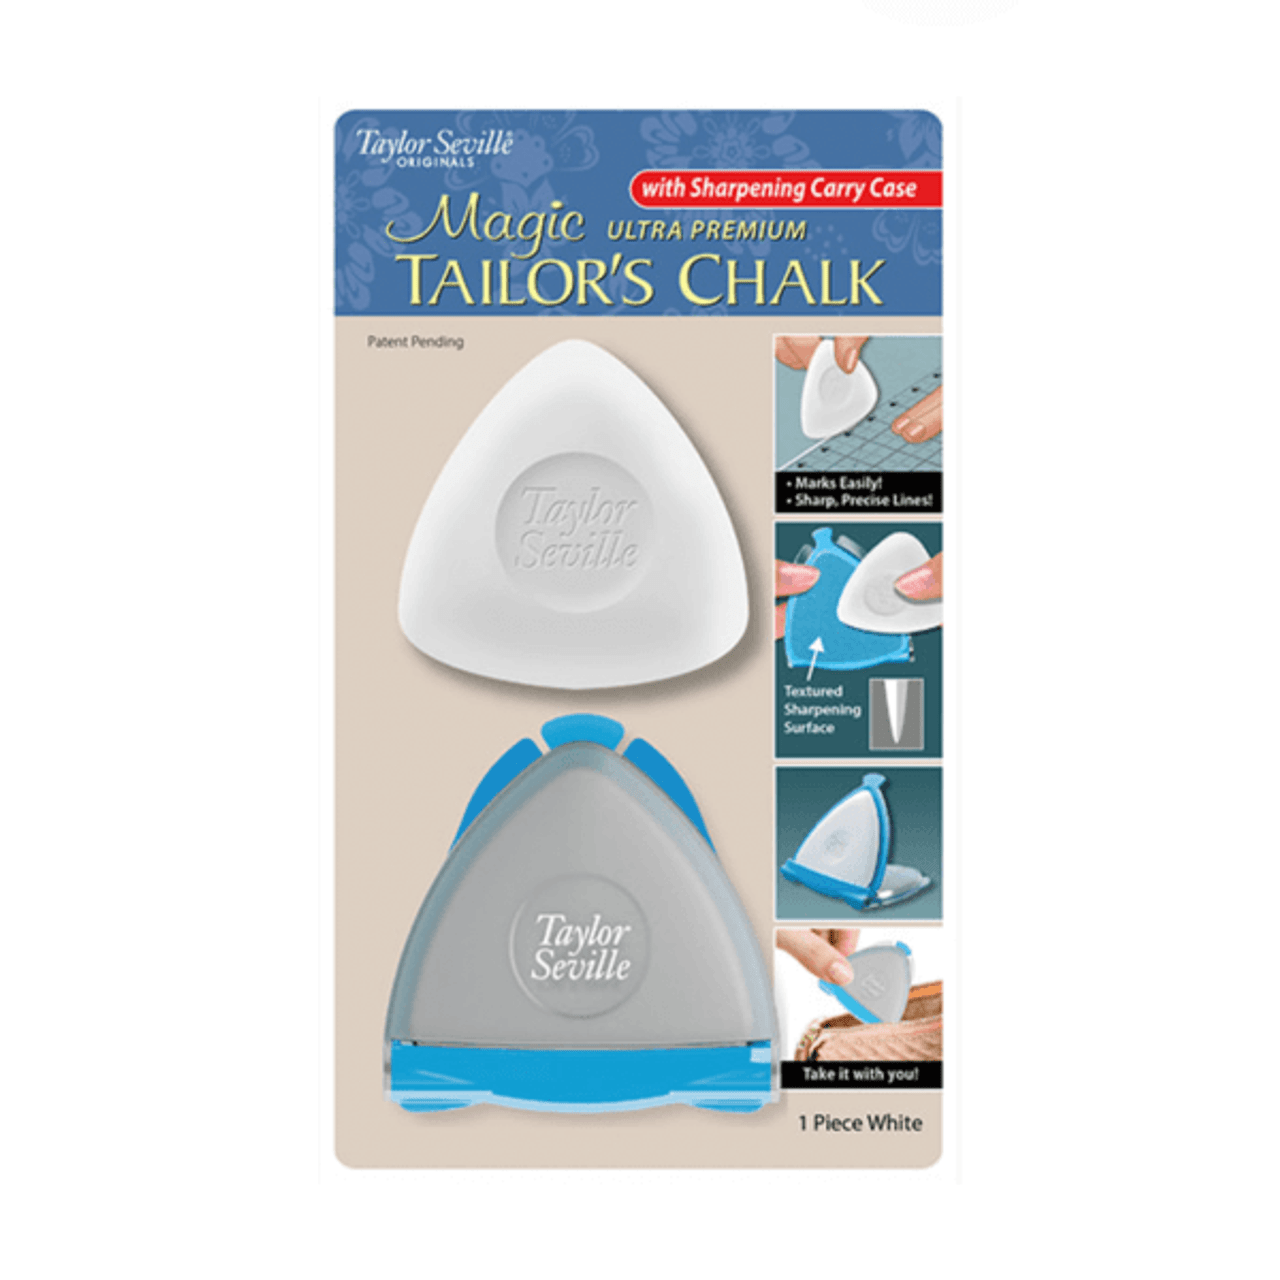 Taylor Seville Ultra Premium Magic Tailors Chalk | White in packaging